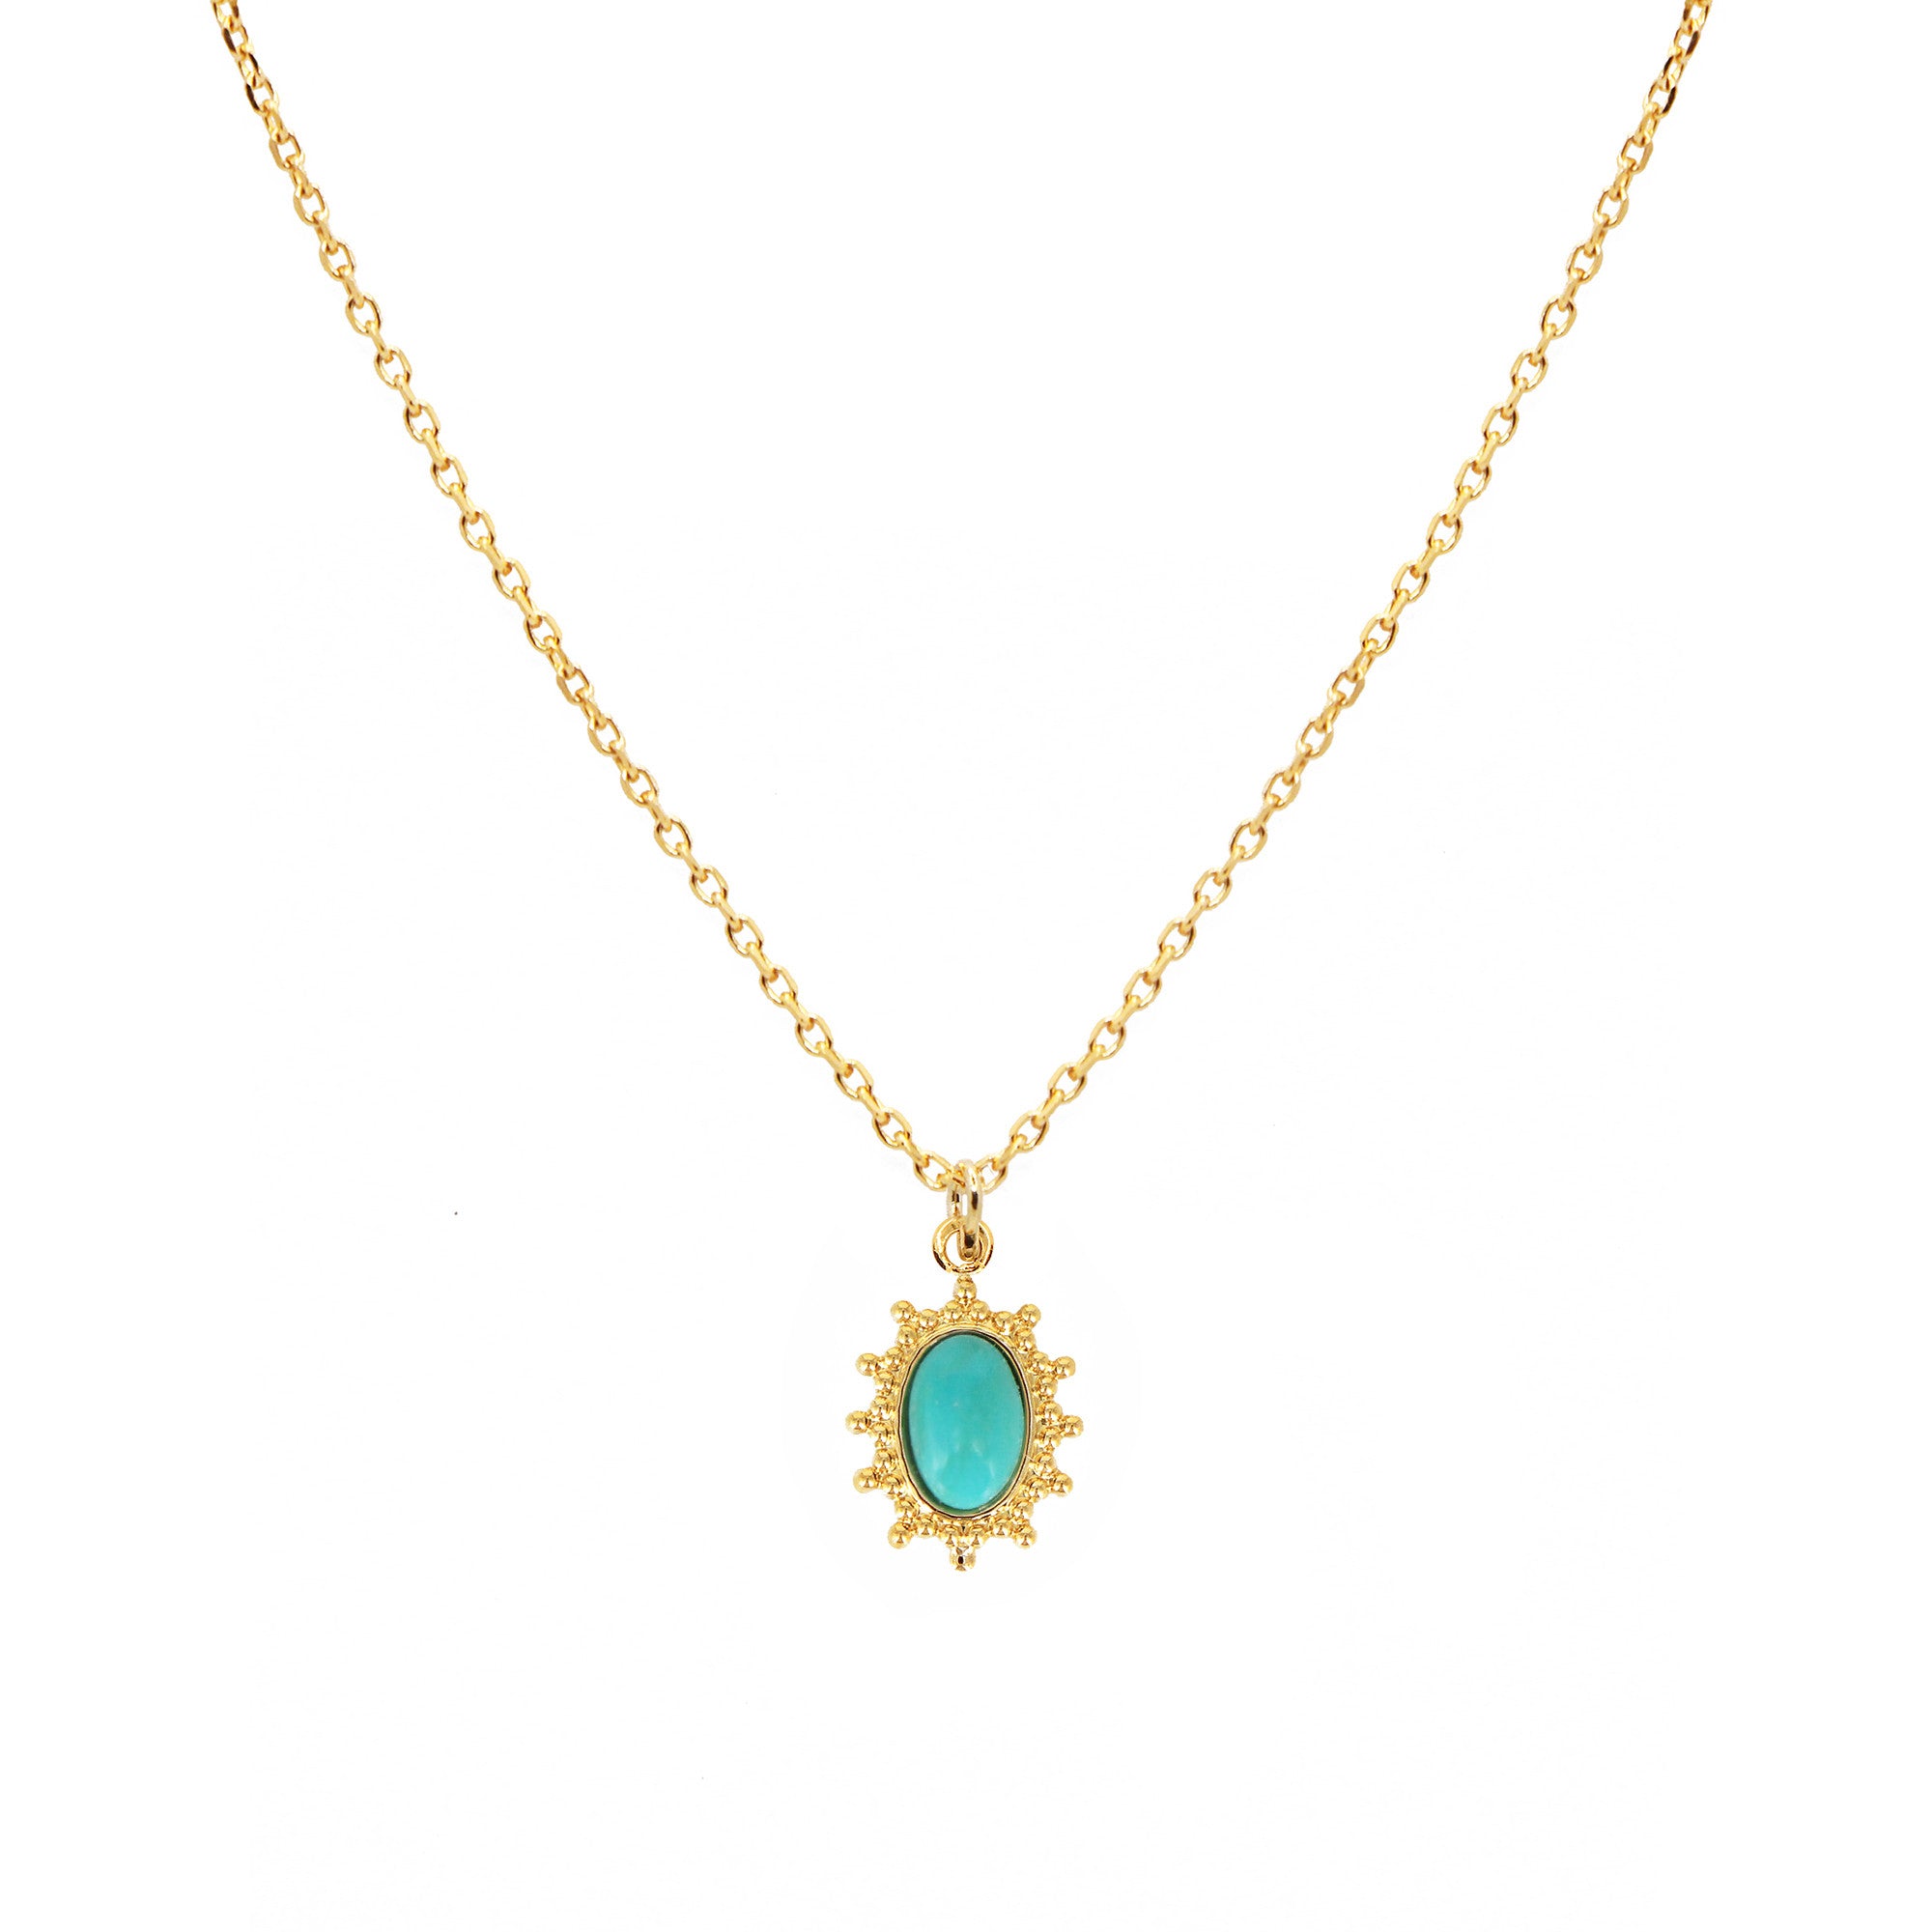 Thelma necklace 